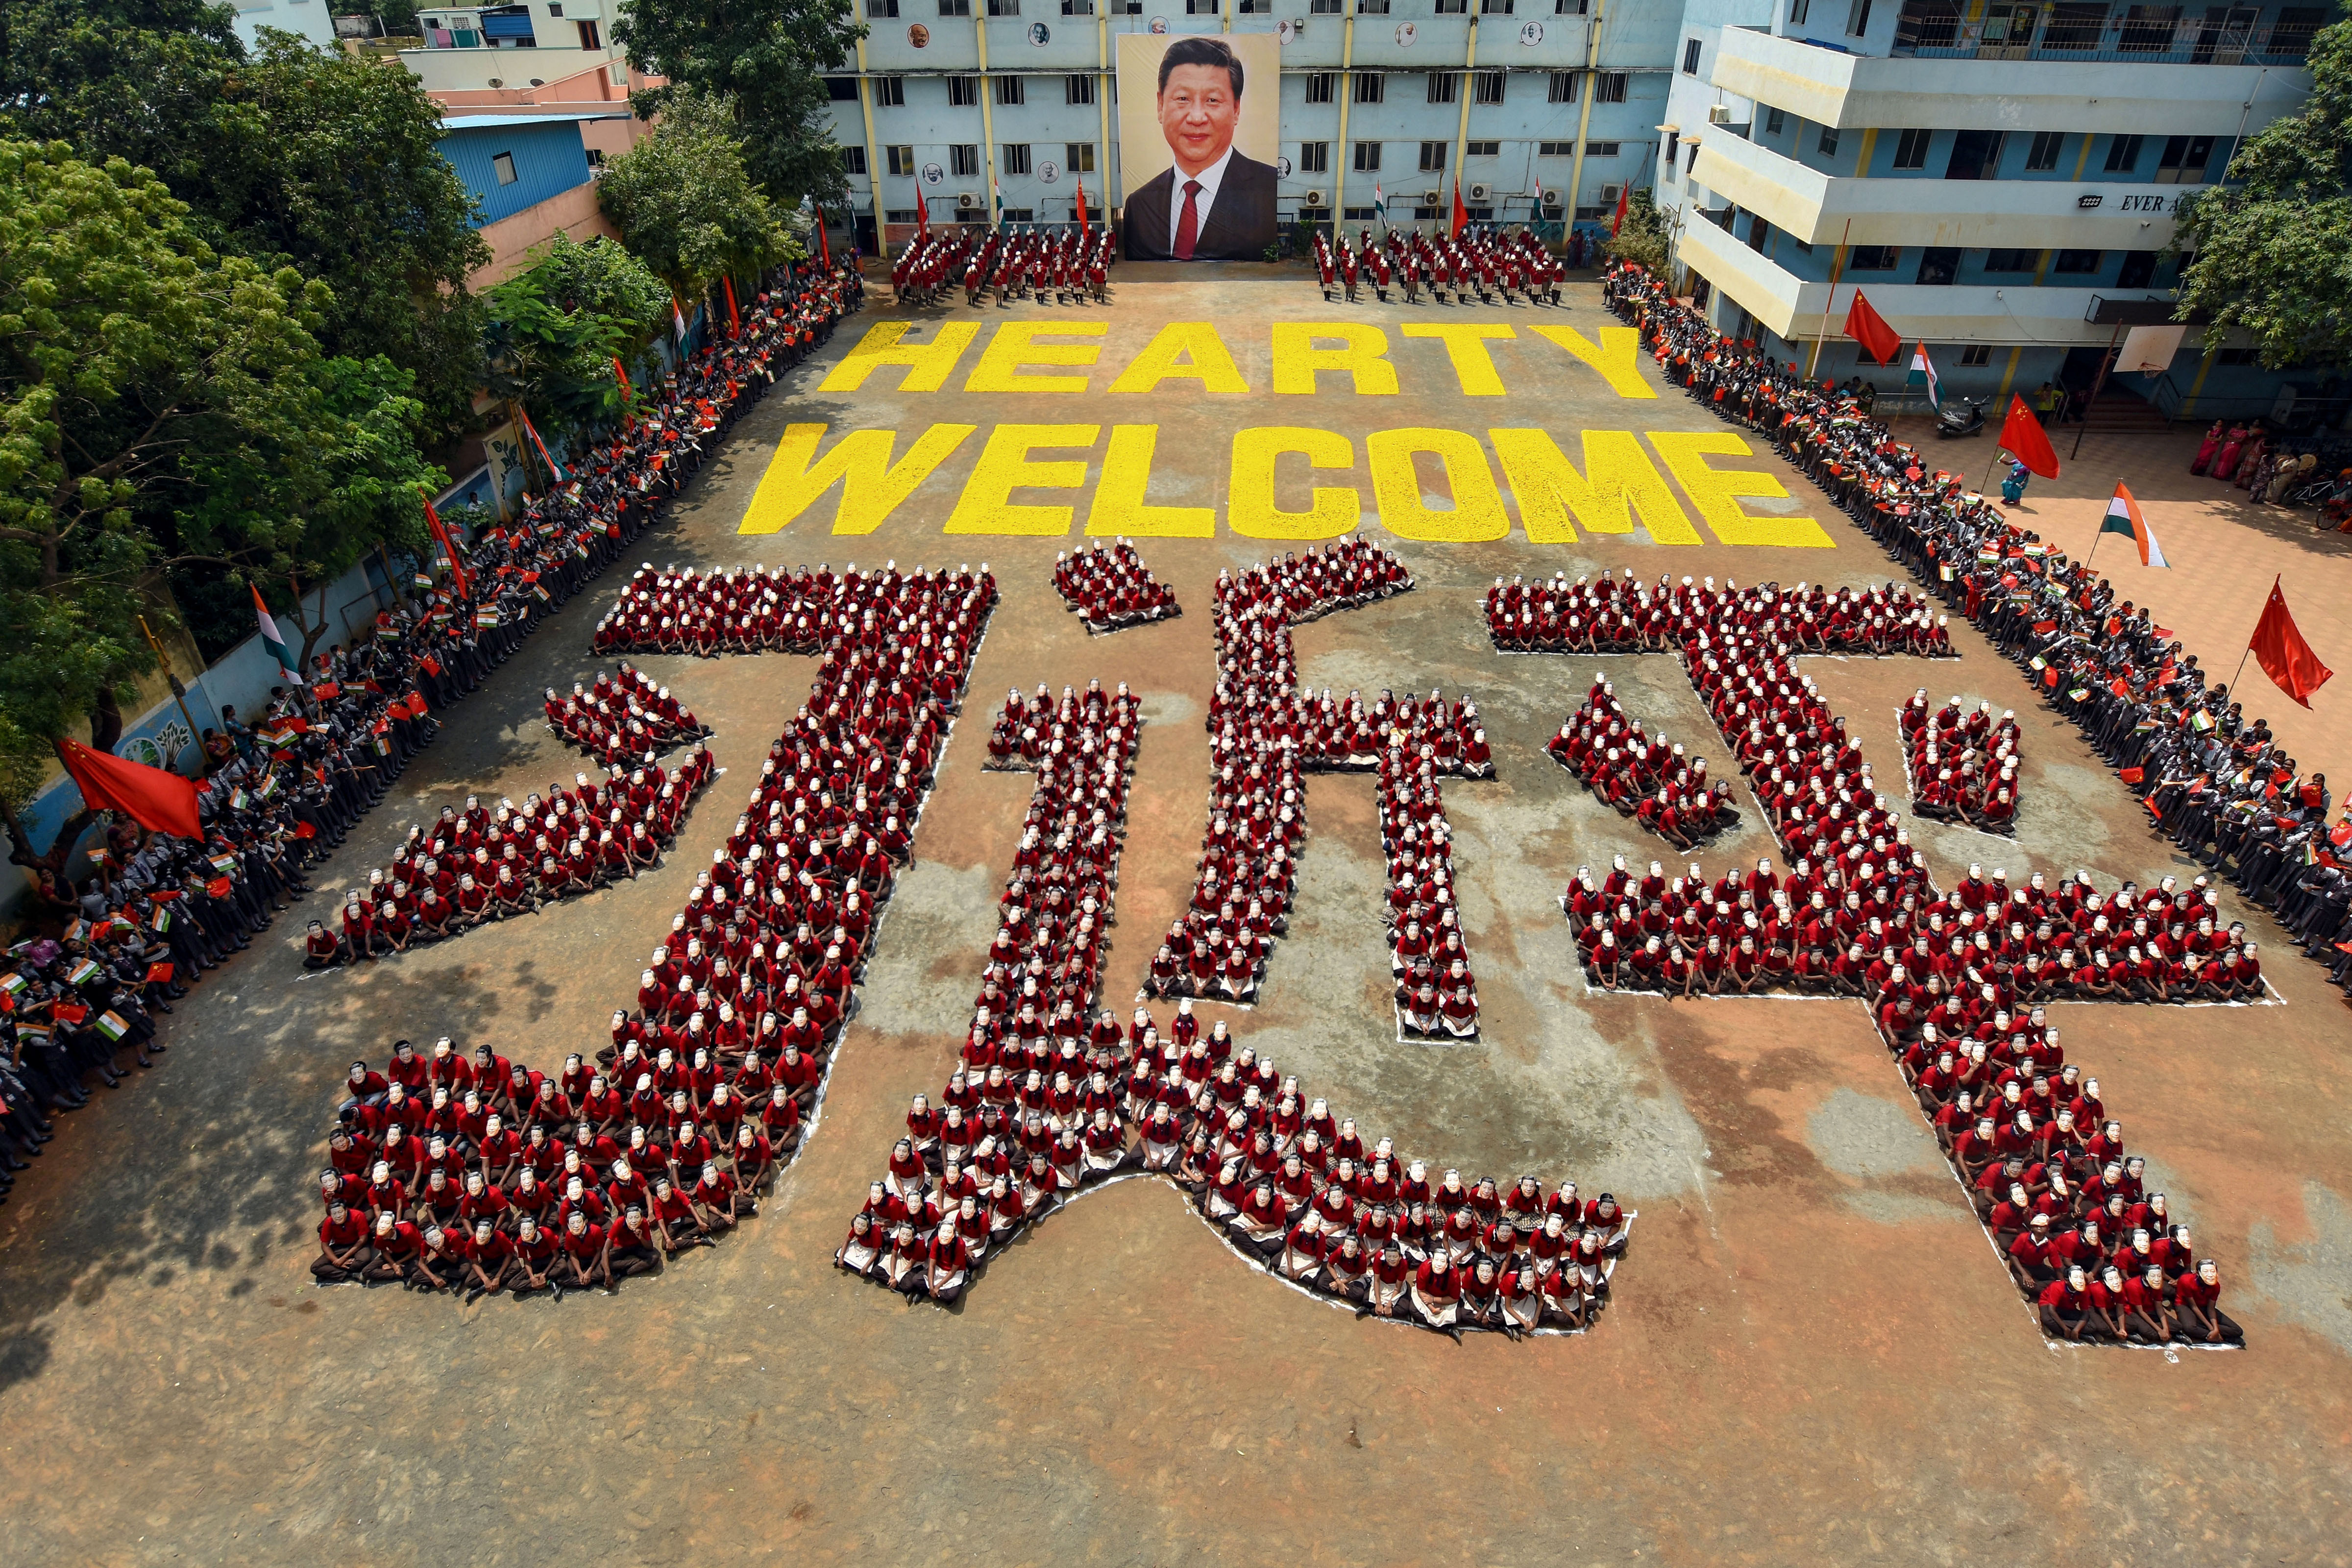 School students create a formation of Chinese President Xi Jinping’s name in Mandarin, ahead of his visit, in Chennai, Friday, October 10, 2019